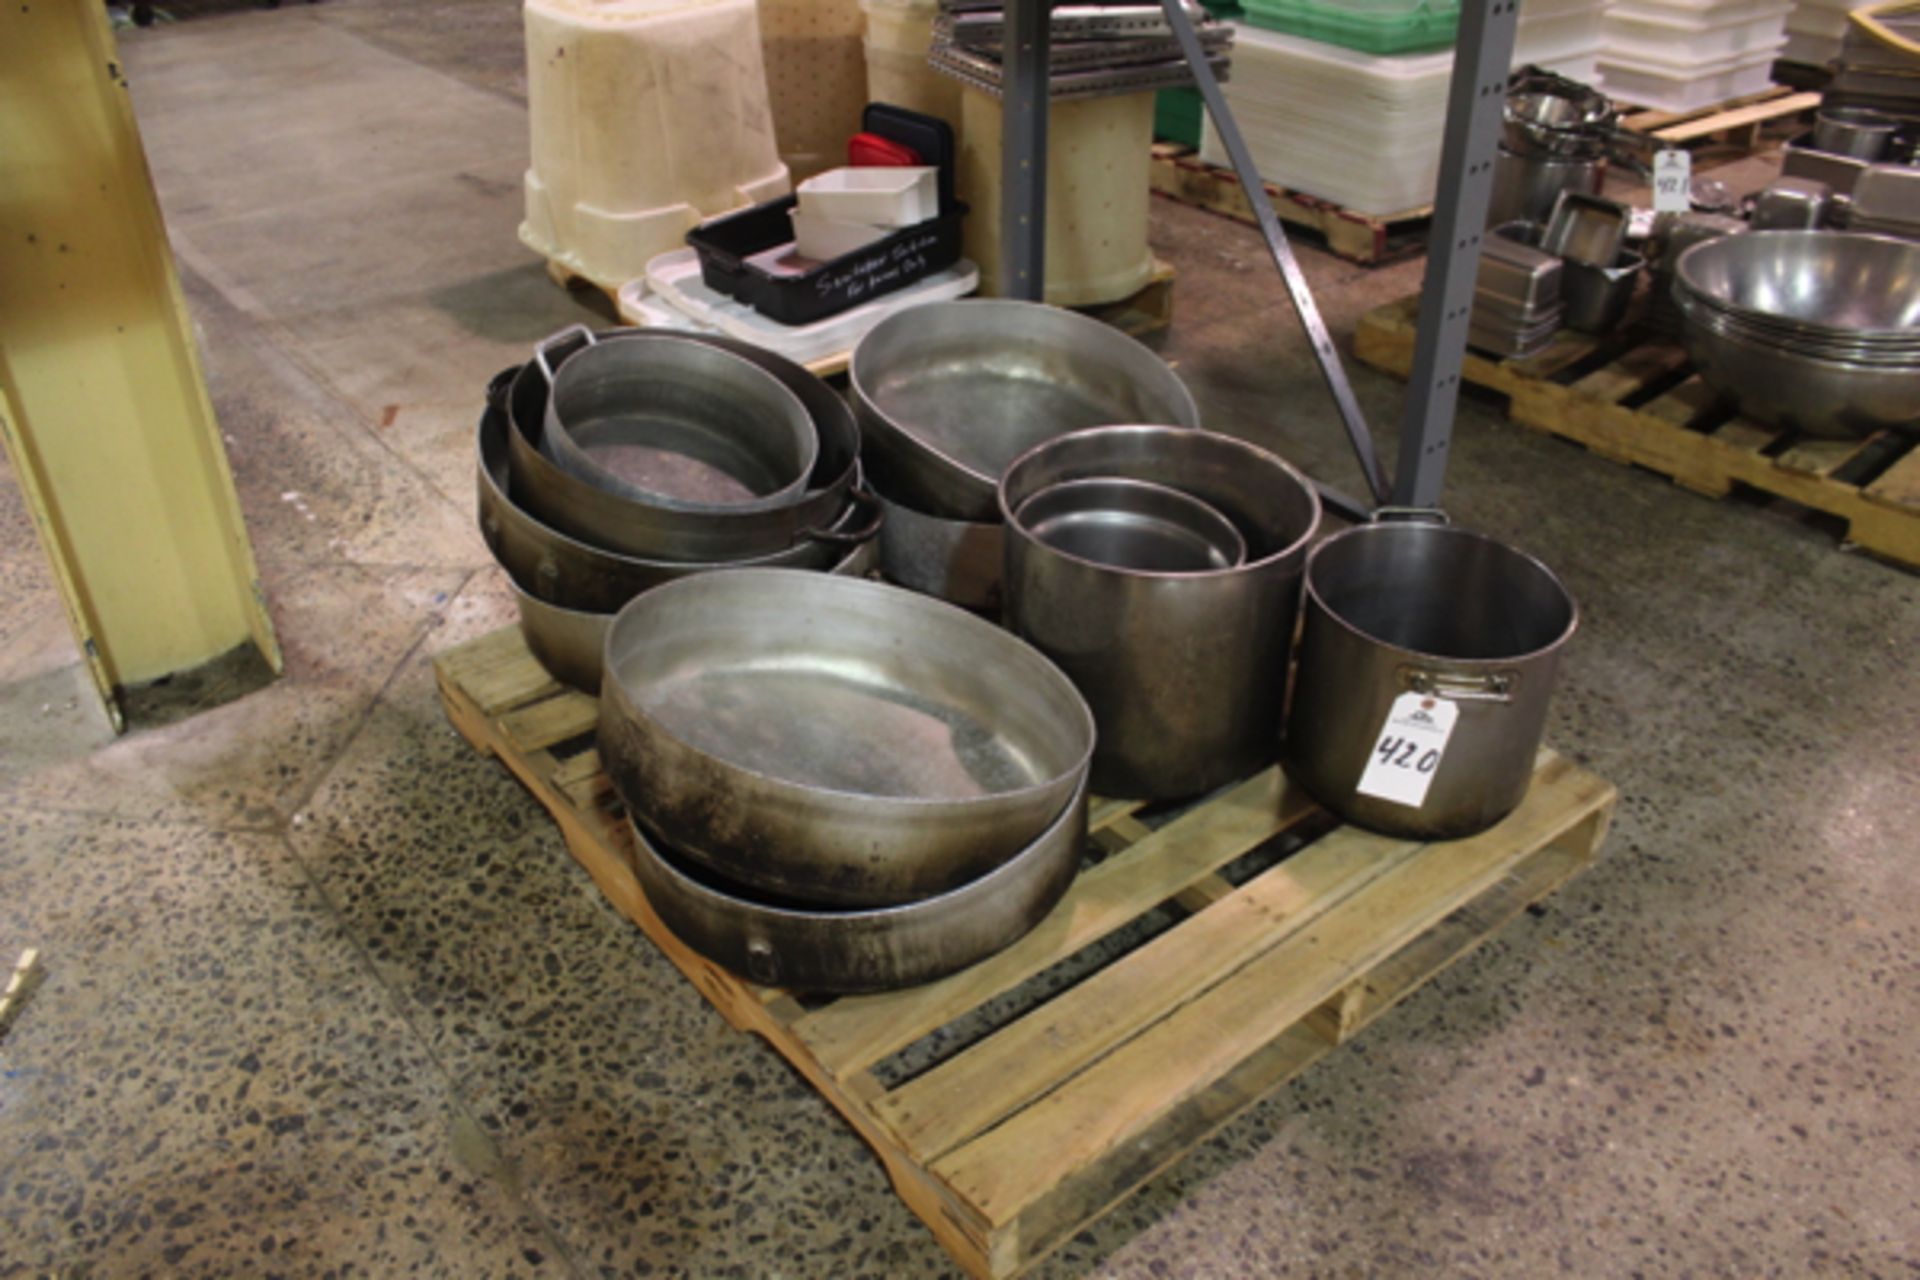 Lot of Cooking Pans | Rigging Price: $10 or May Hand Carry